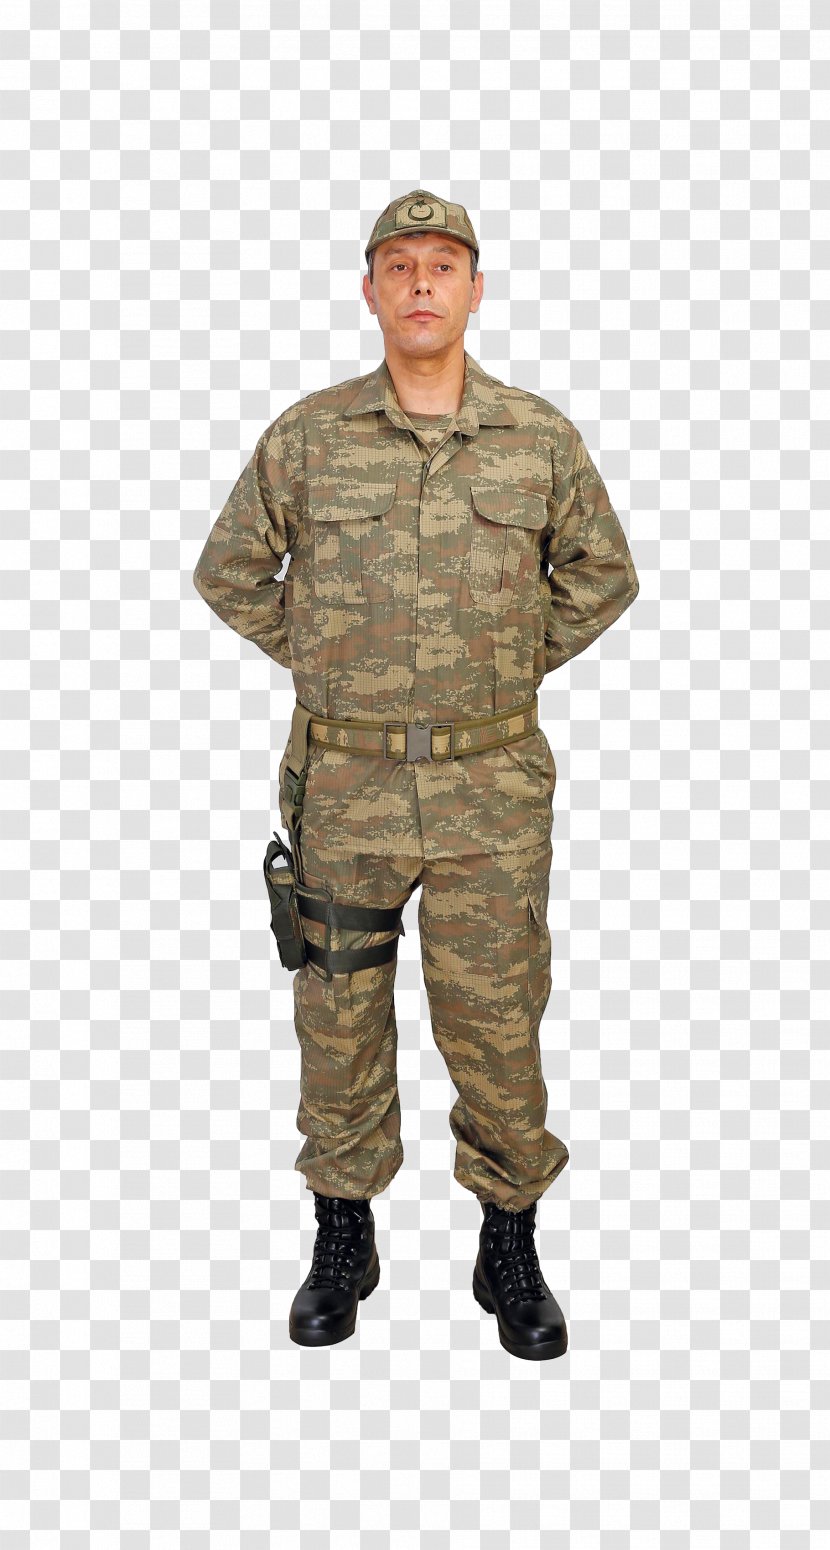 Soldier Military Uniform Education And Training Army Transparent PNG